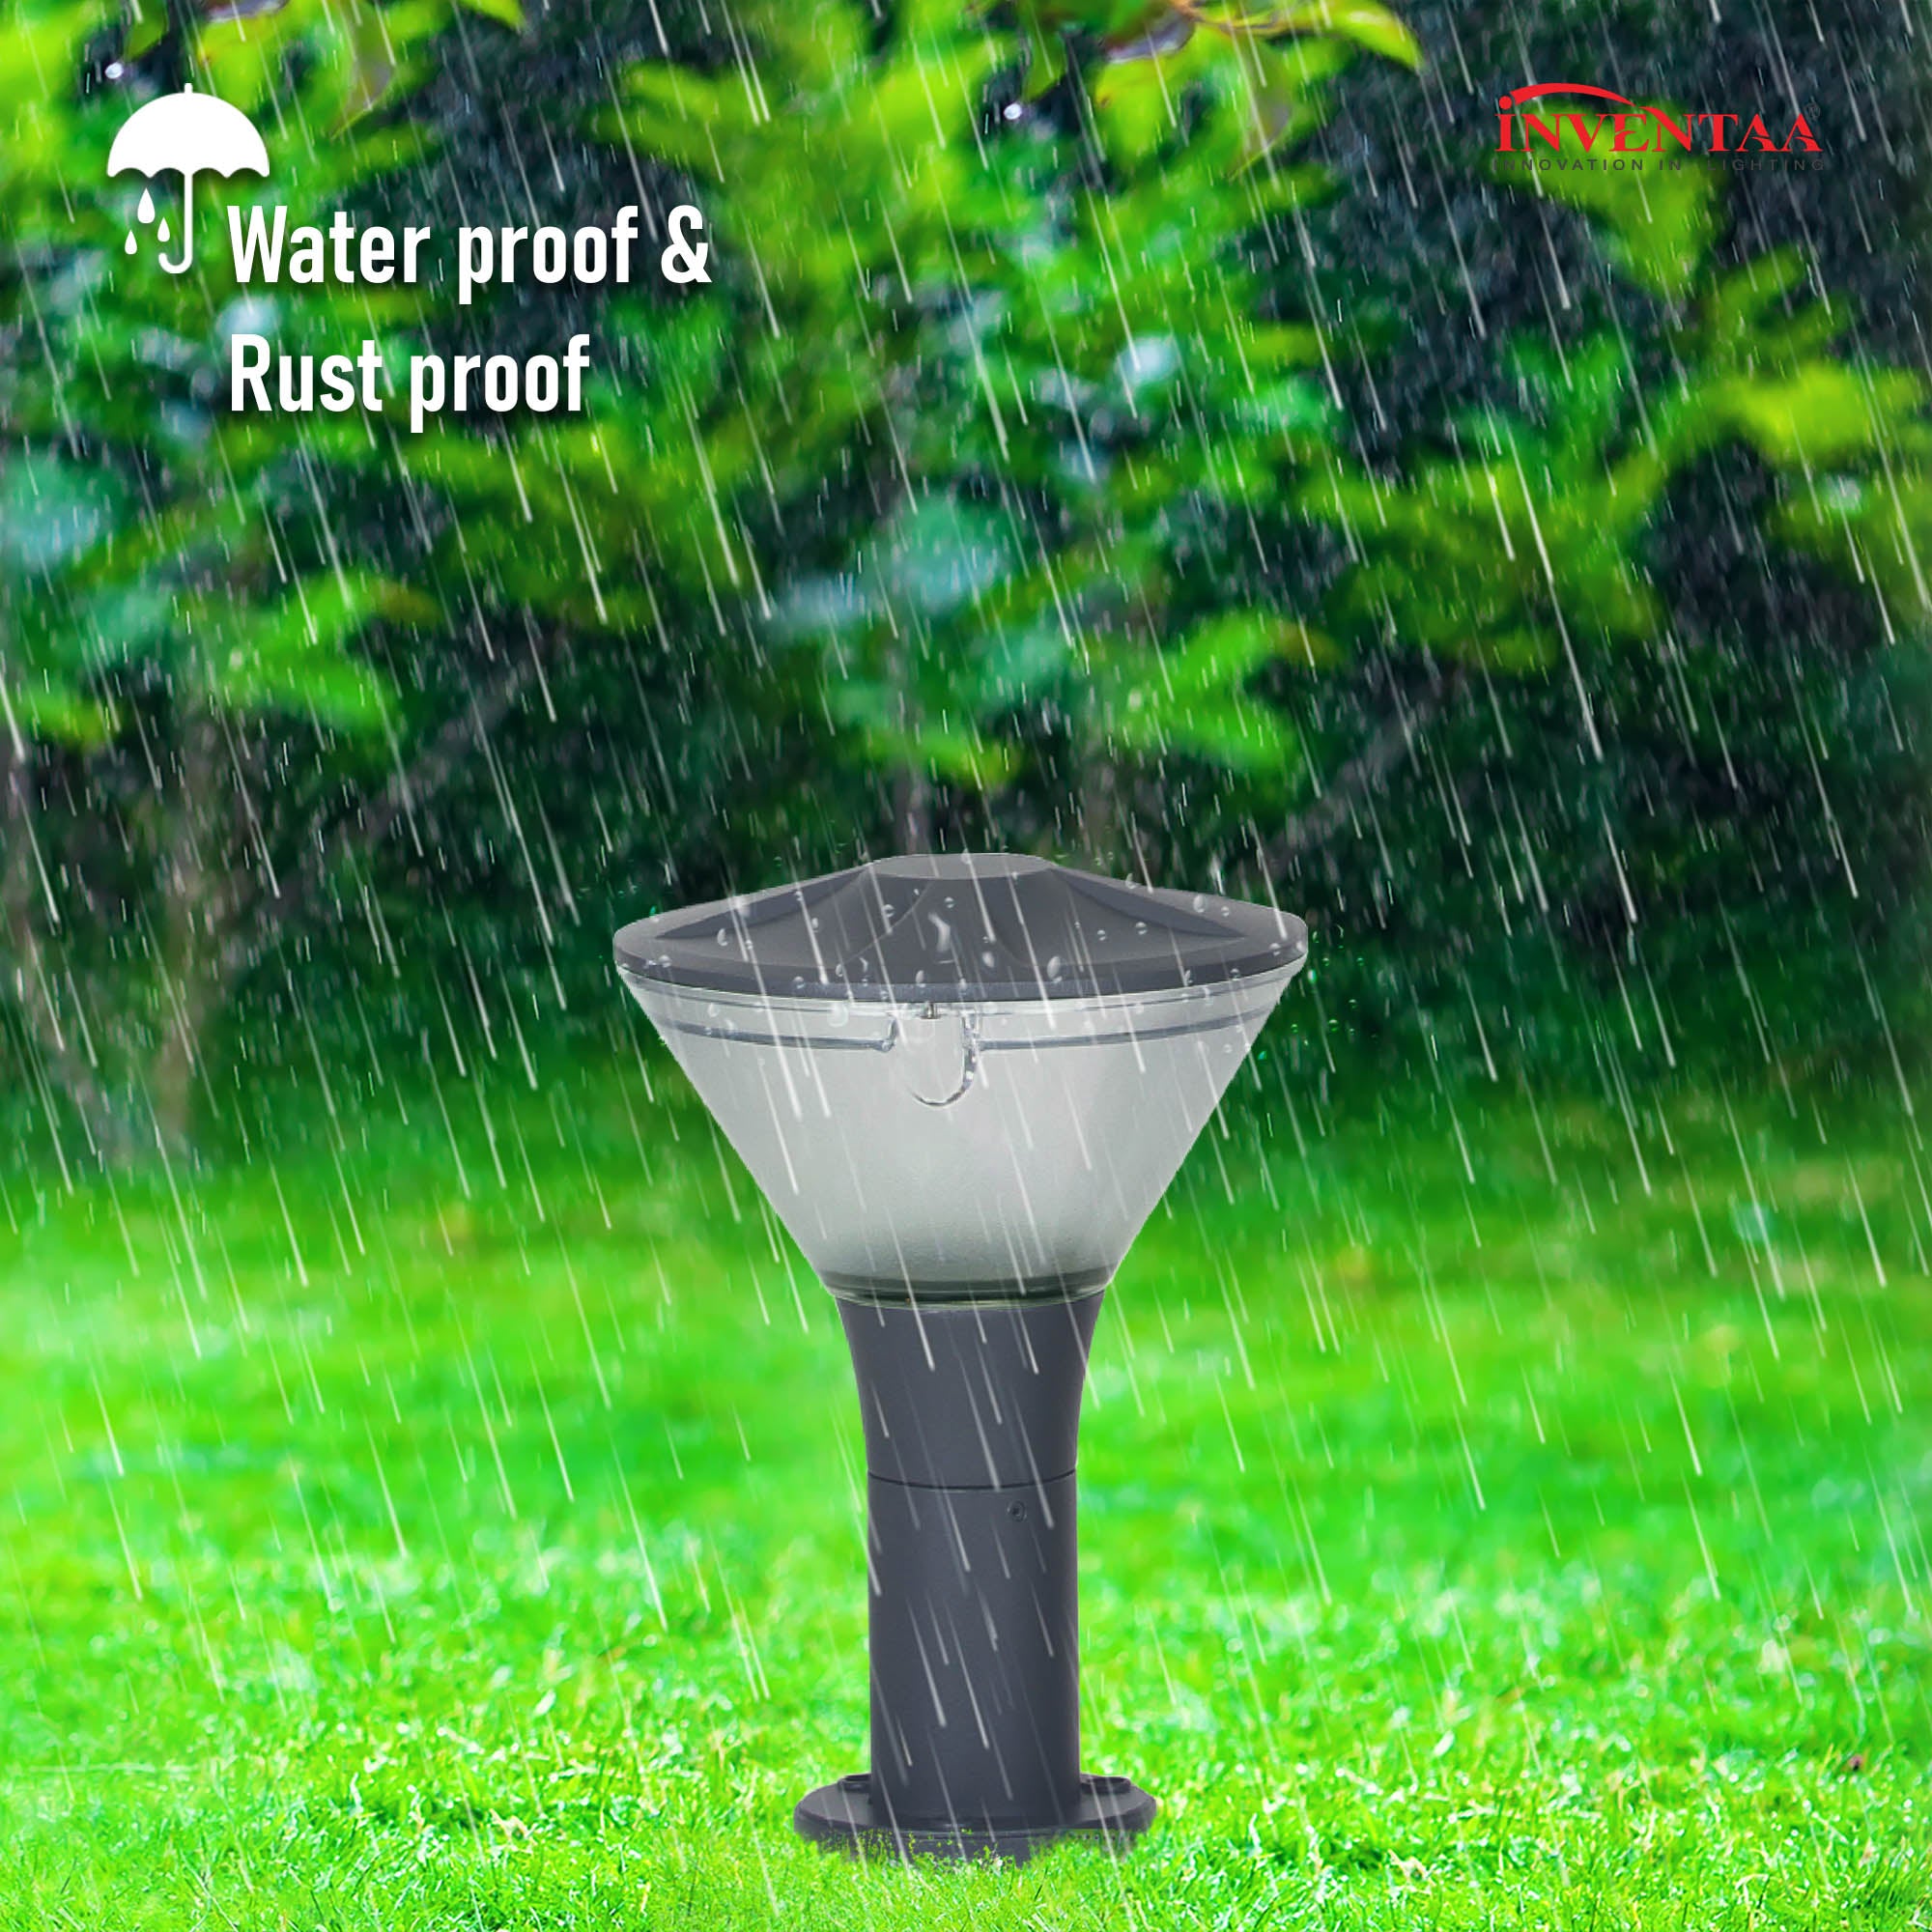 Yash 1 feet led garden bollard light featuring its rustproof and waterproof resistance for outdoor use #size_1 feet